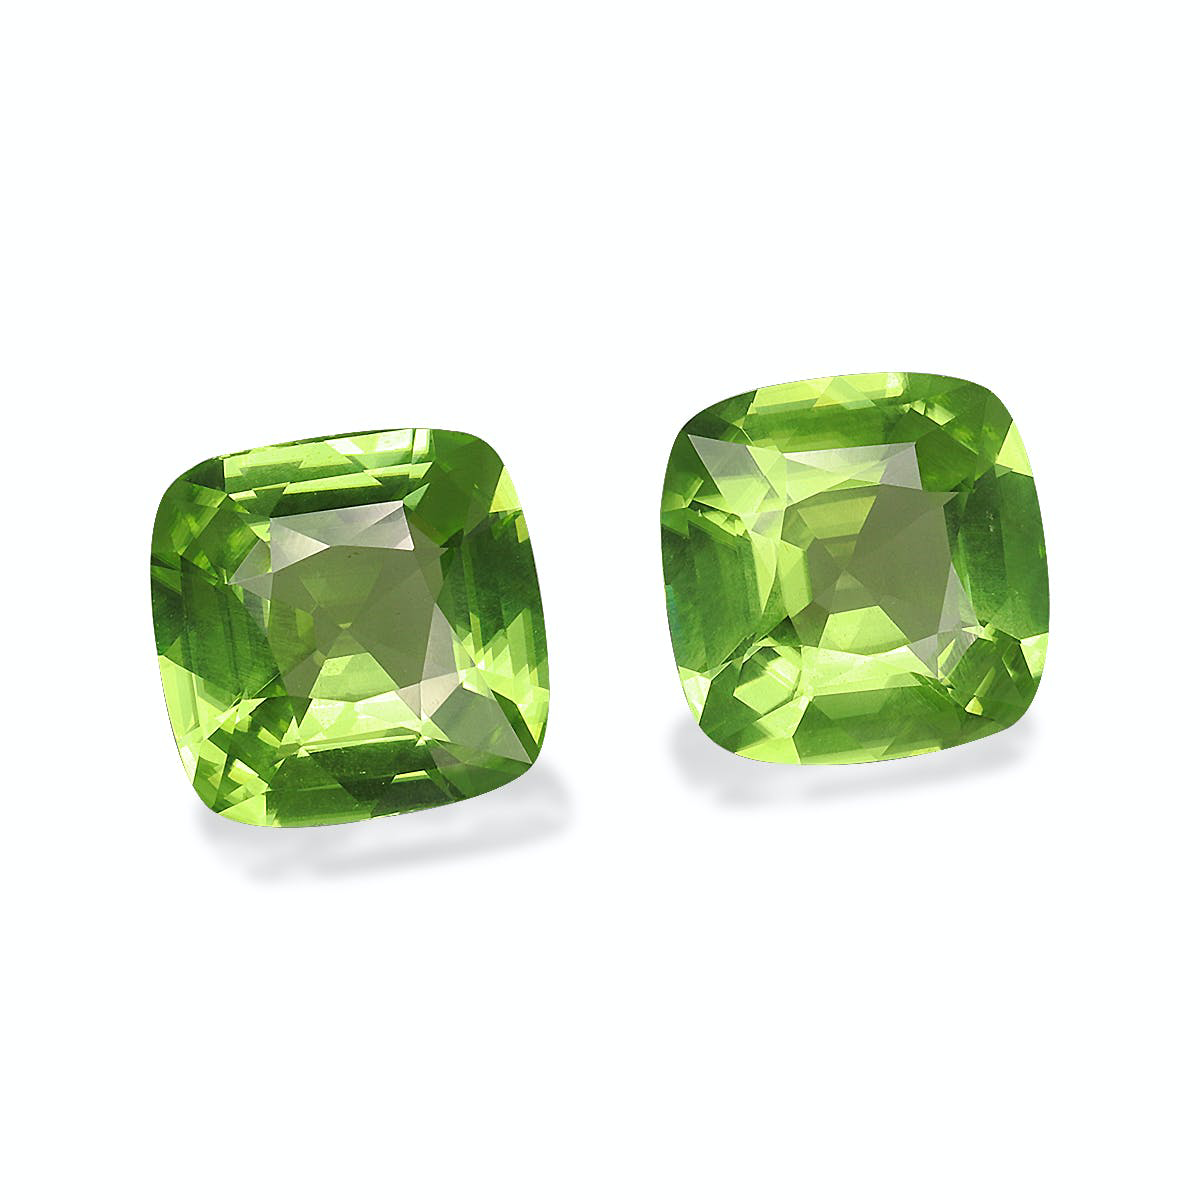 Picture of Lime Green Peridot 6.04ct - 9mm Pair (PD0128)